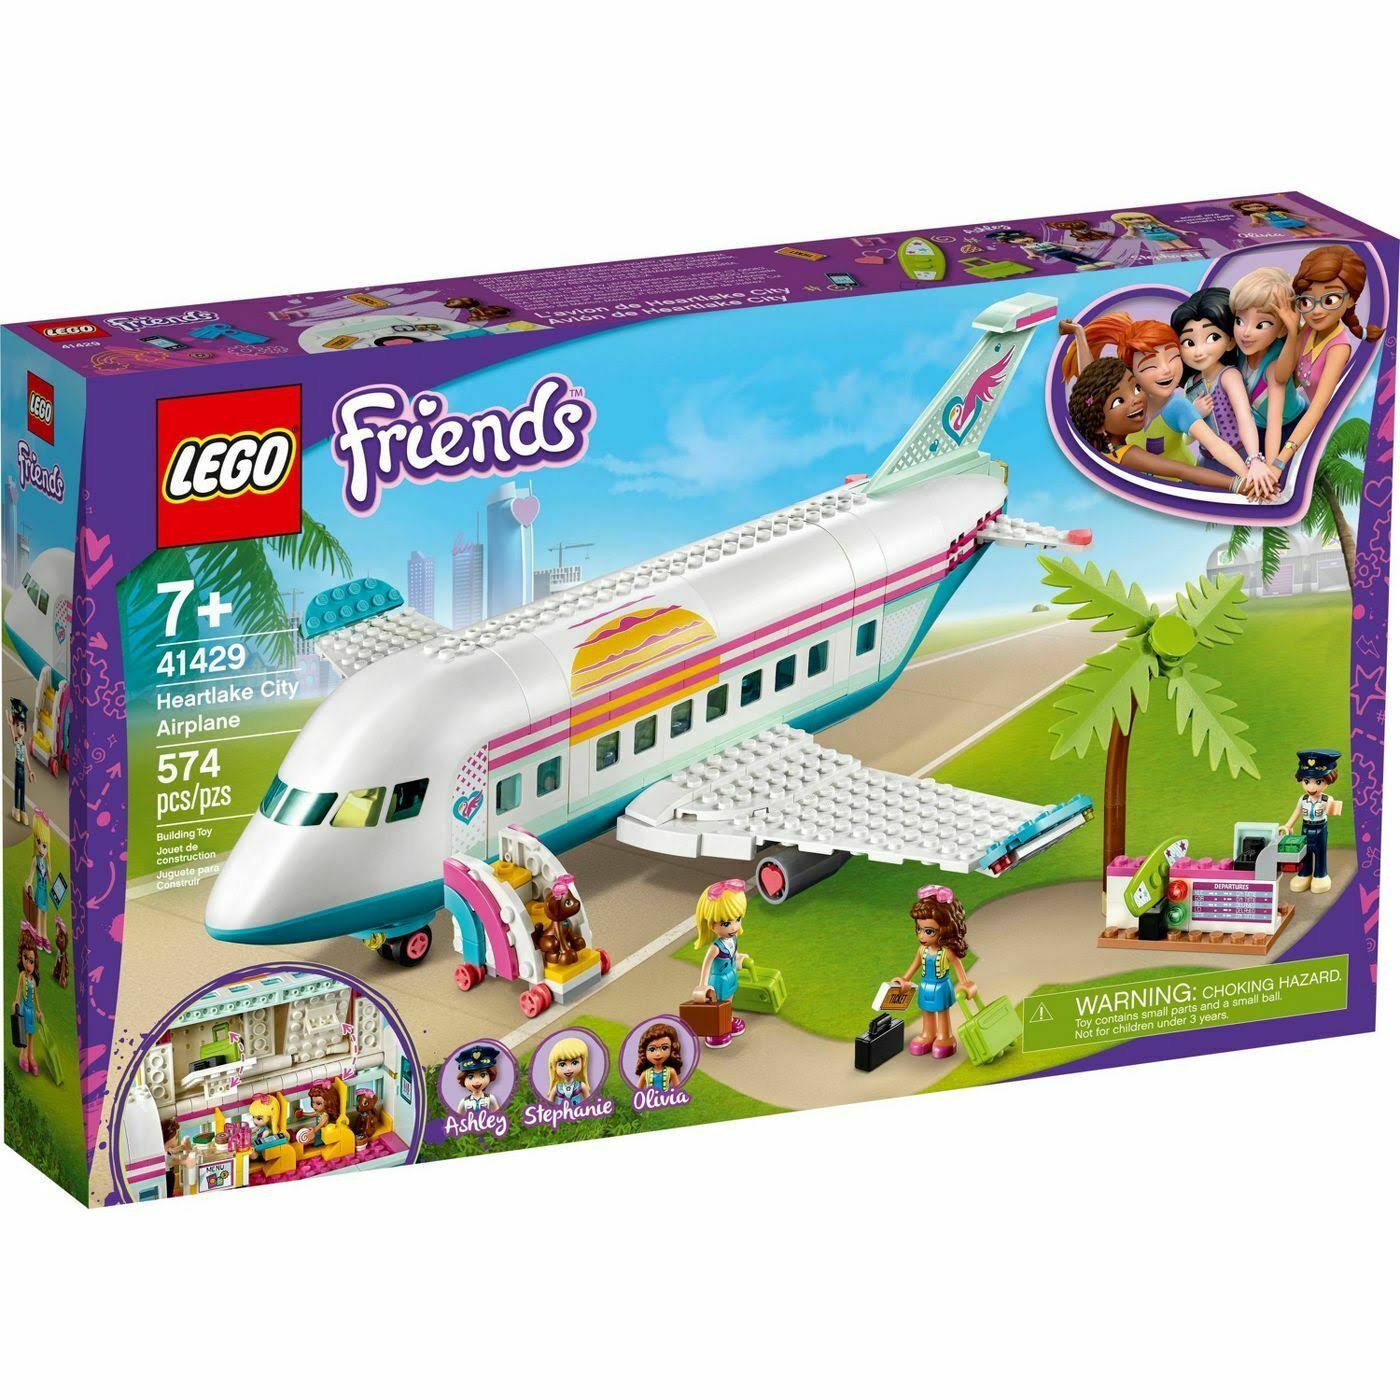 Lego 41429 Friends Heartlake City Airplane Building Kit New with Sealed Box